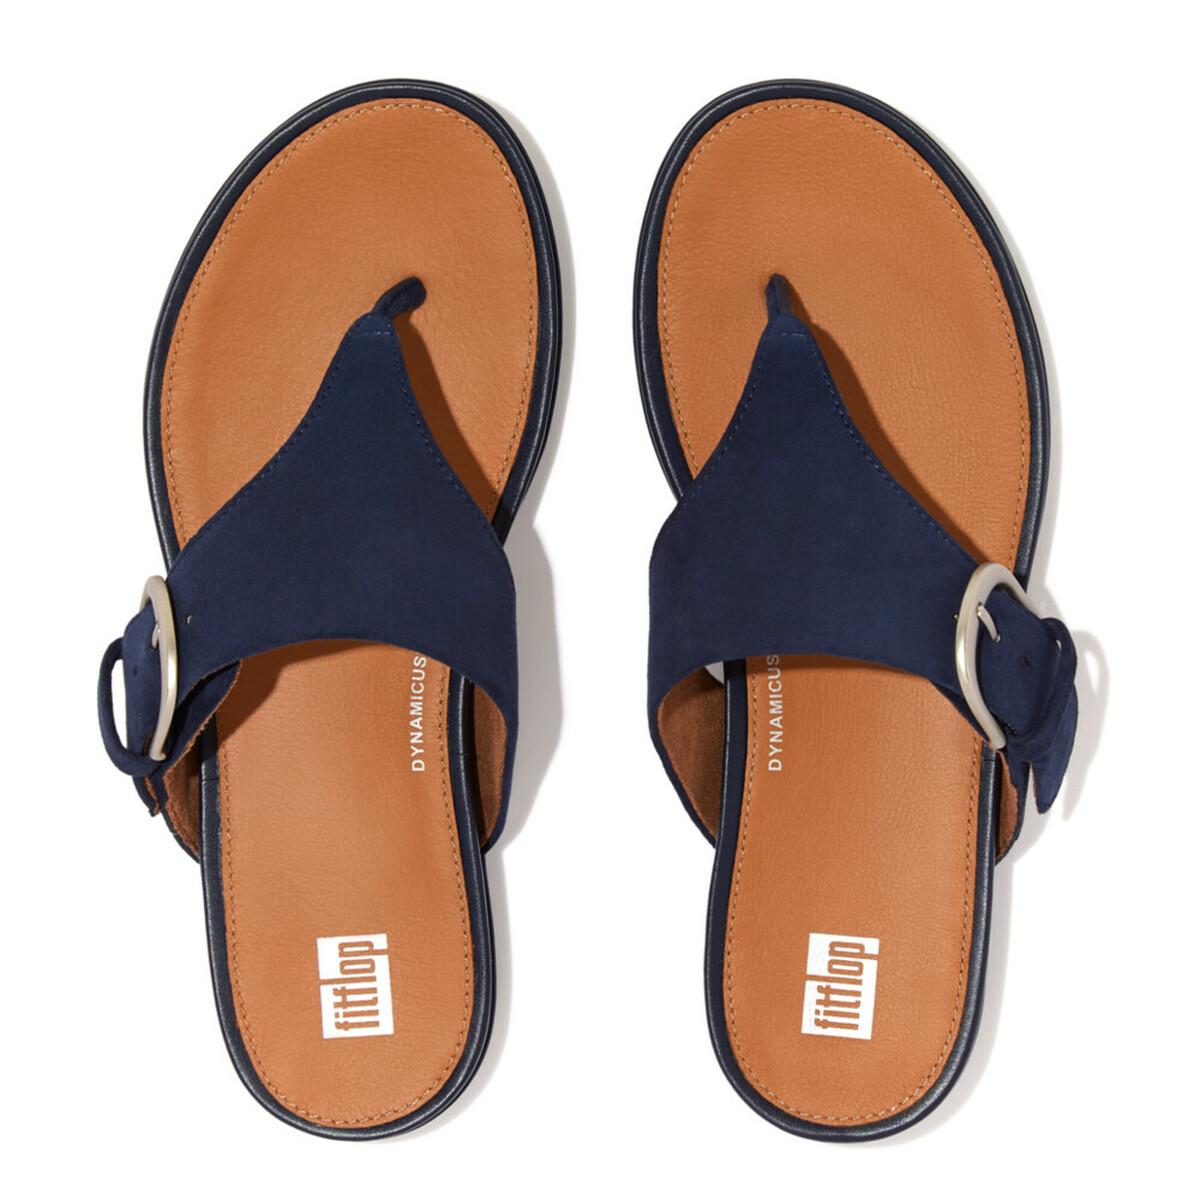 Buy FitFlop Men's Navy Cross Strap Sandals for Men at Best Price @ Tata CLiQ